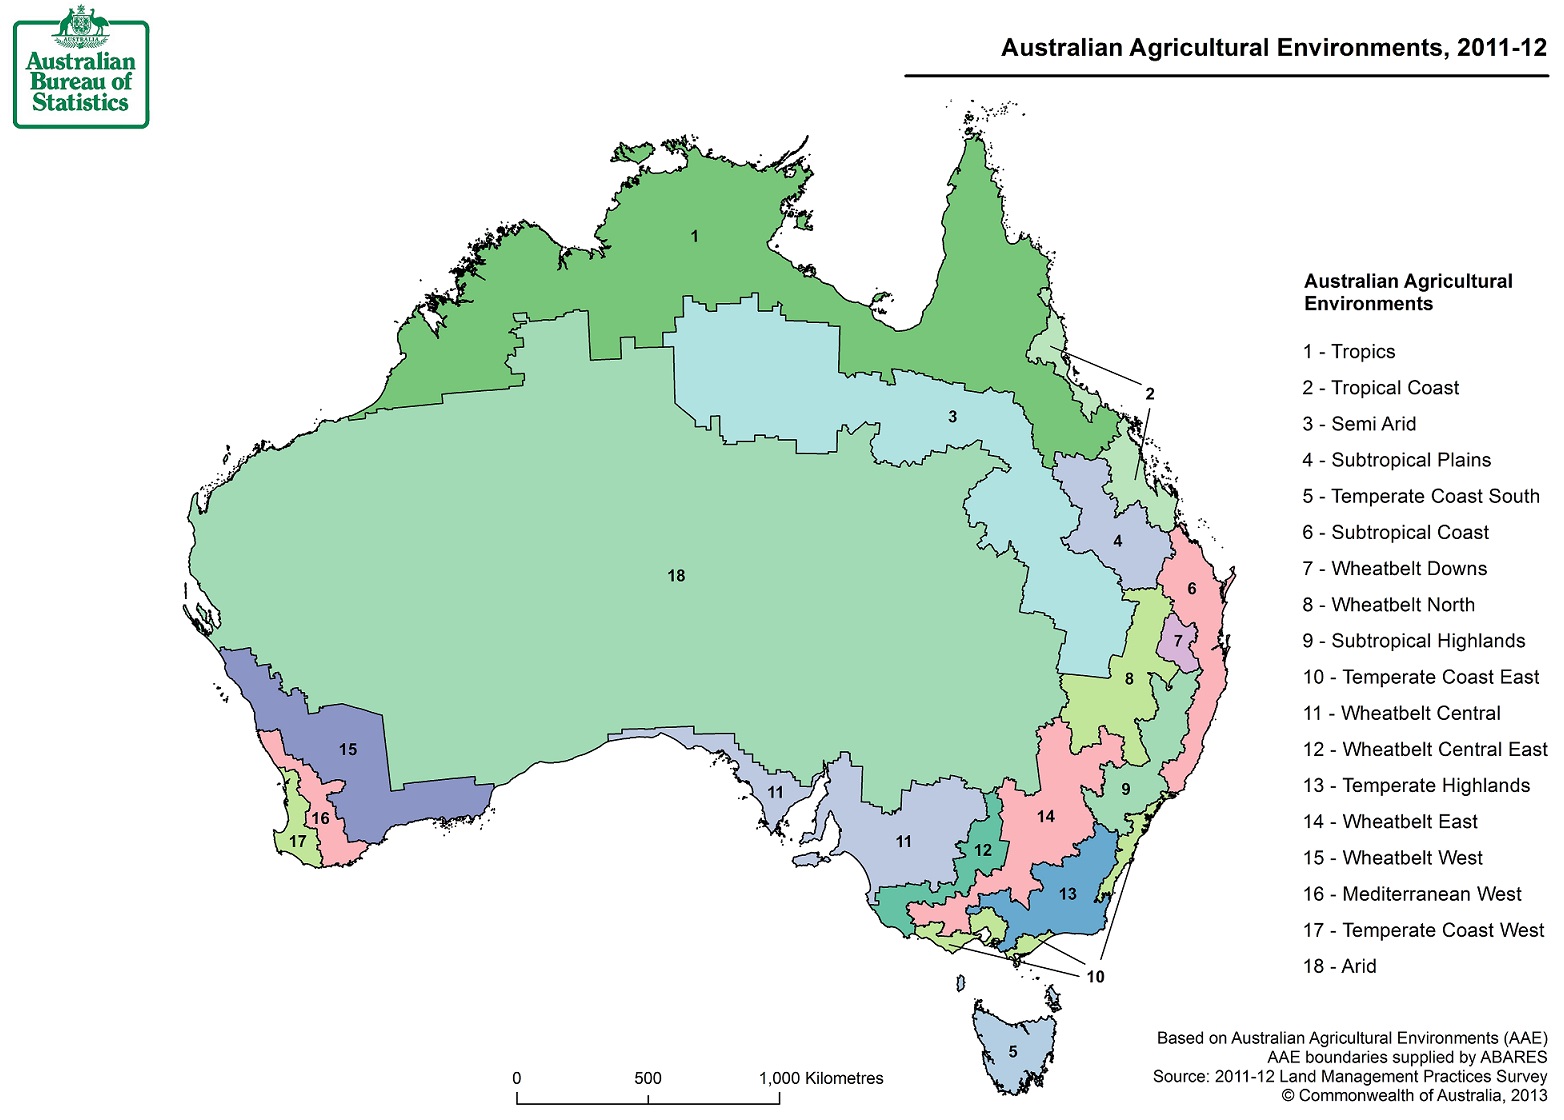 Image: Map of Australian Agricultural Environments